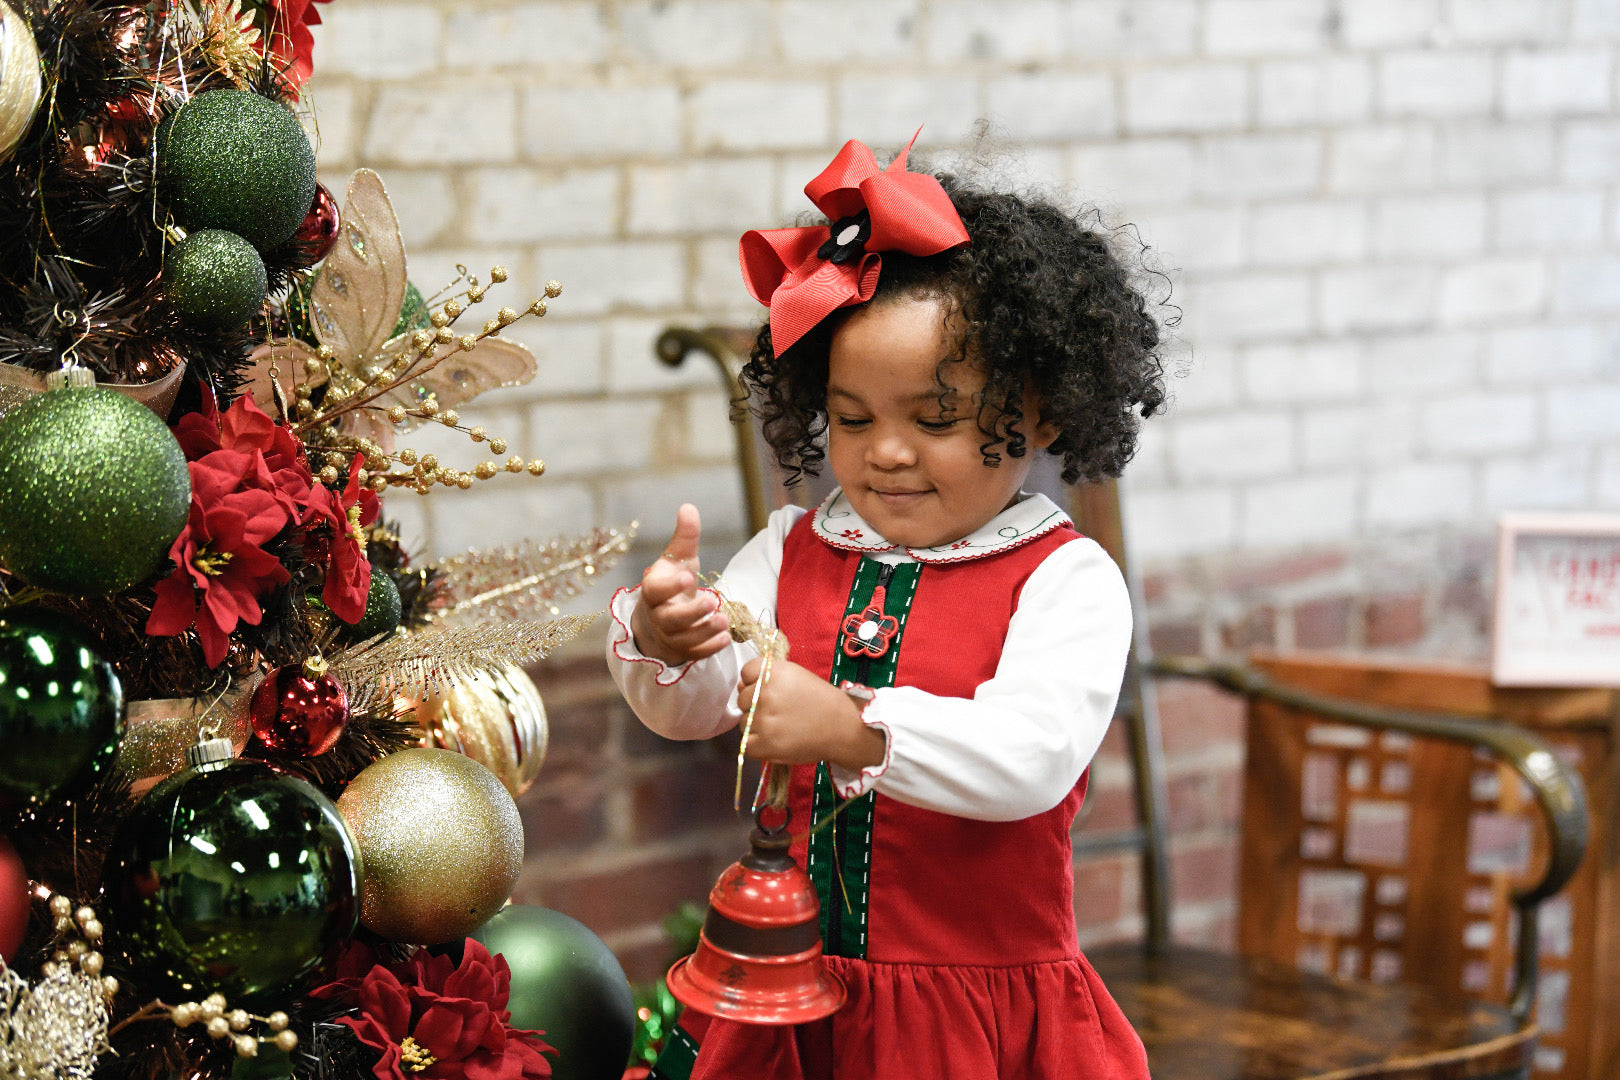 young girl decorating a tree in a holiday dress with matching hair bow